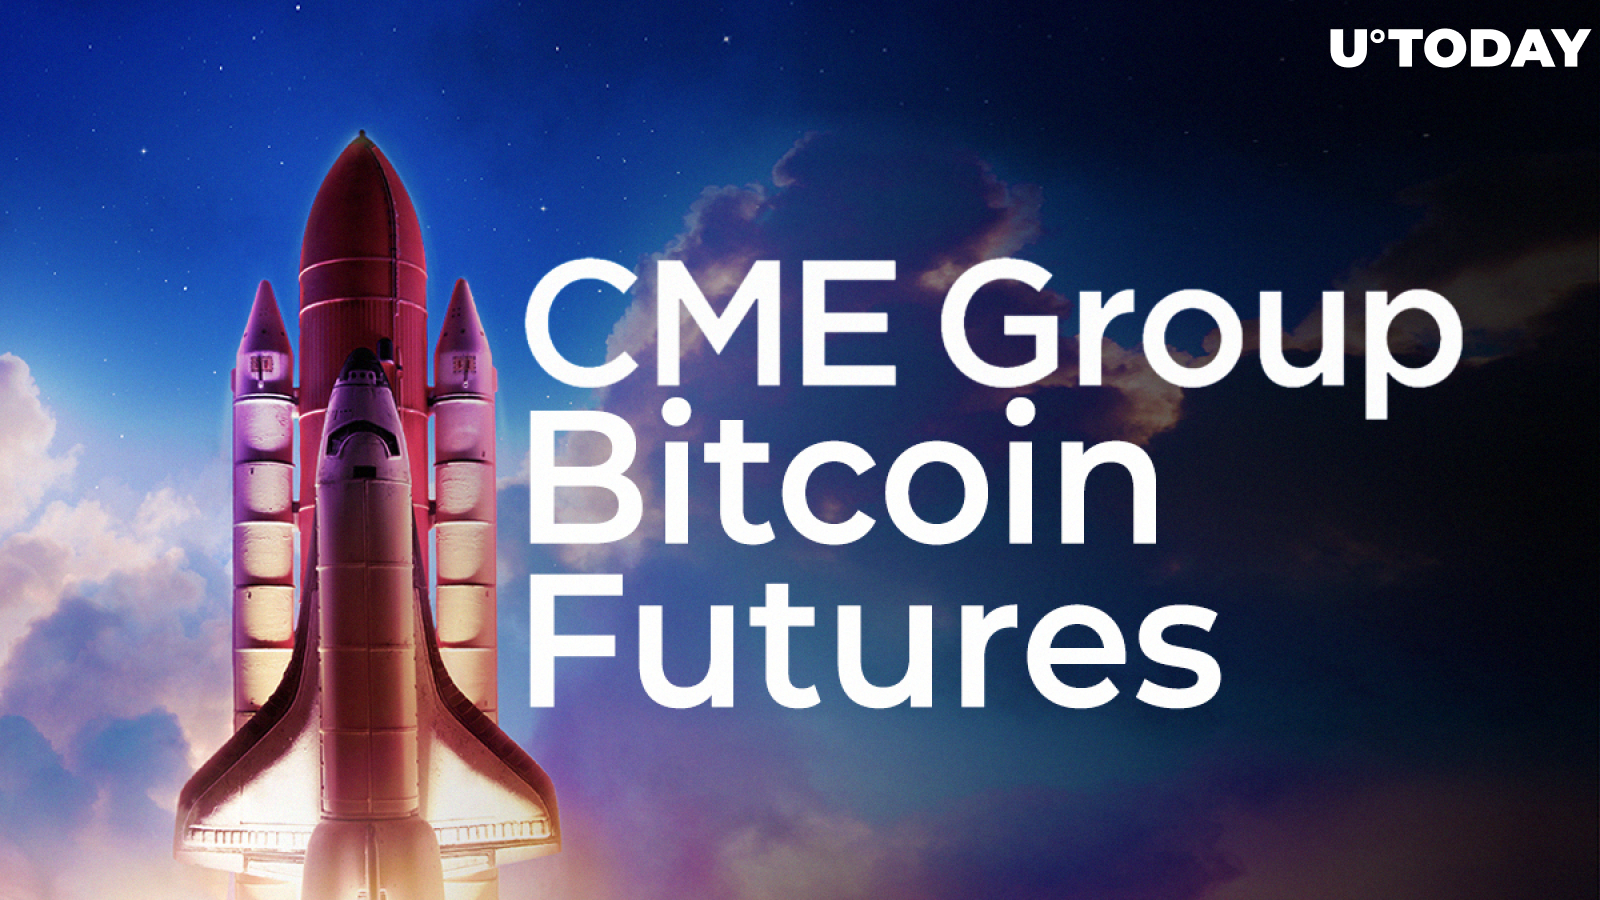 CME Group's Bitcoin (BTC) Futures Record Massive Volumes This Year. What's Behind This Growth?